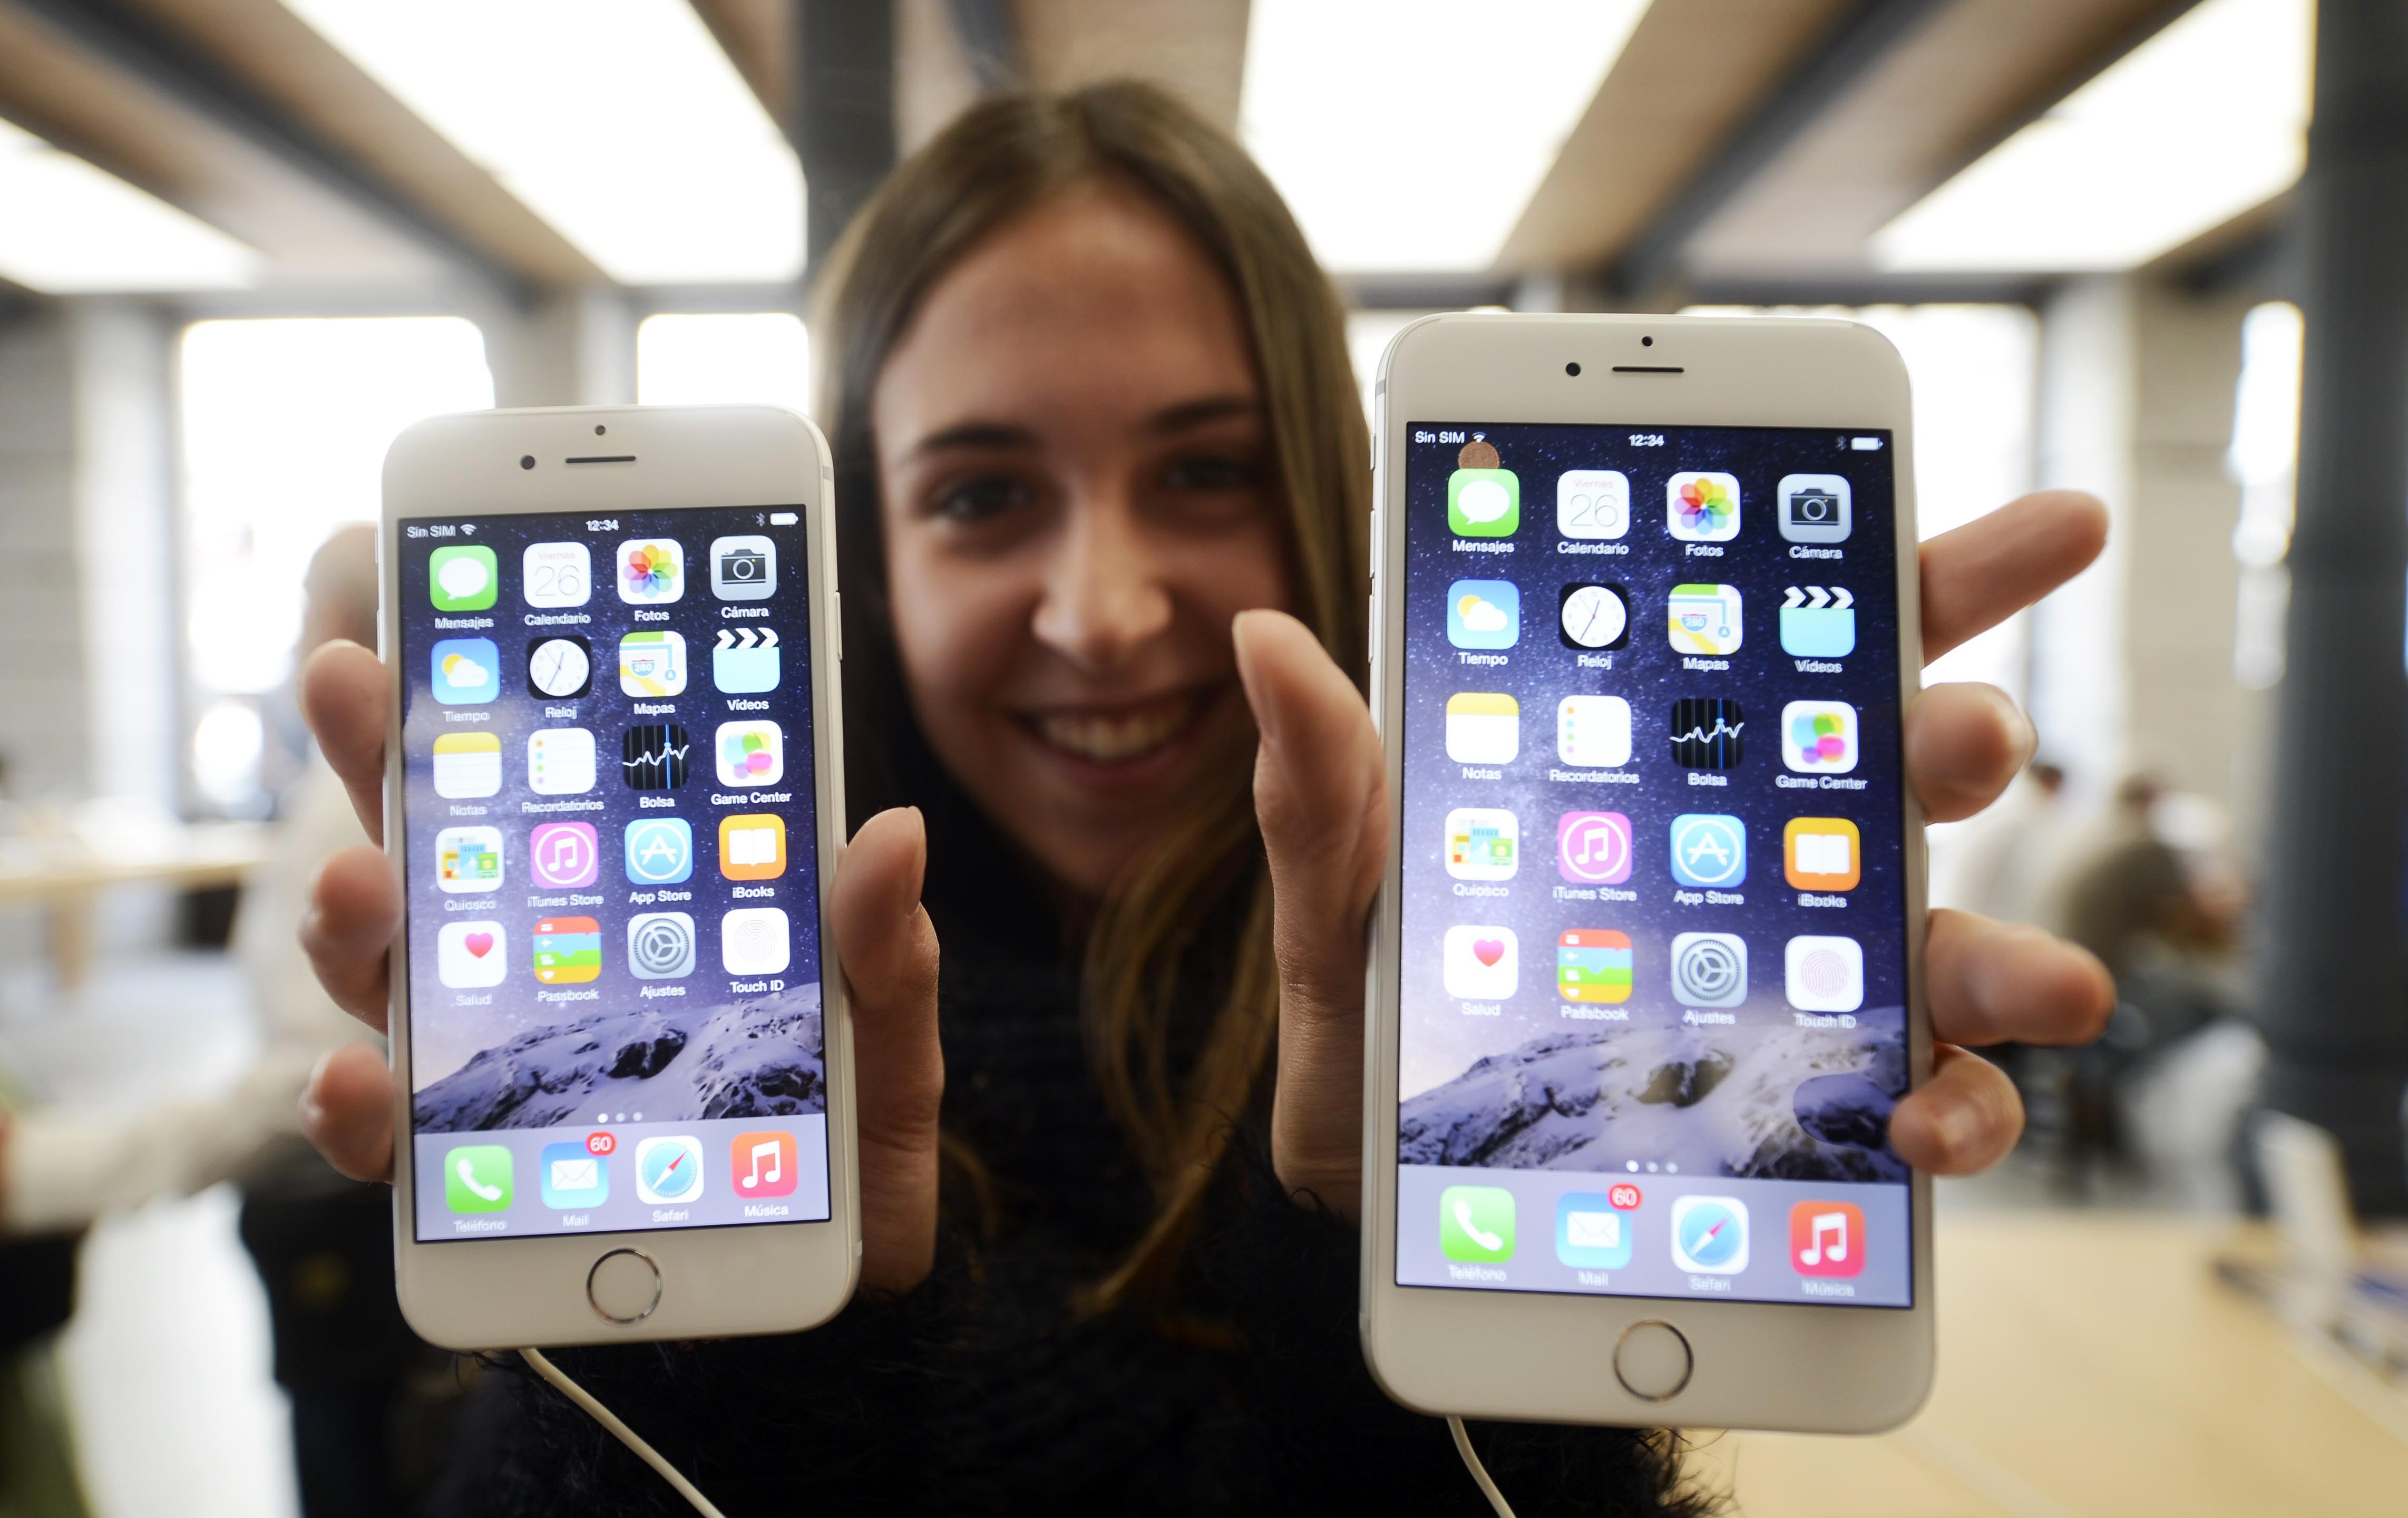 A customer shows the new products of Apple, iPhone 6 and iPhone 6 Plus, at an Apple Store in Madrid, Spain, on September 26, 2014. (Anadolu Agency—Getty Images)